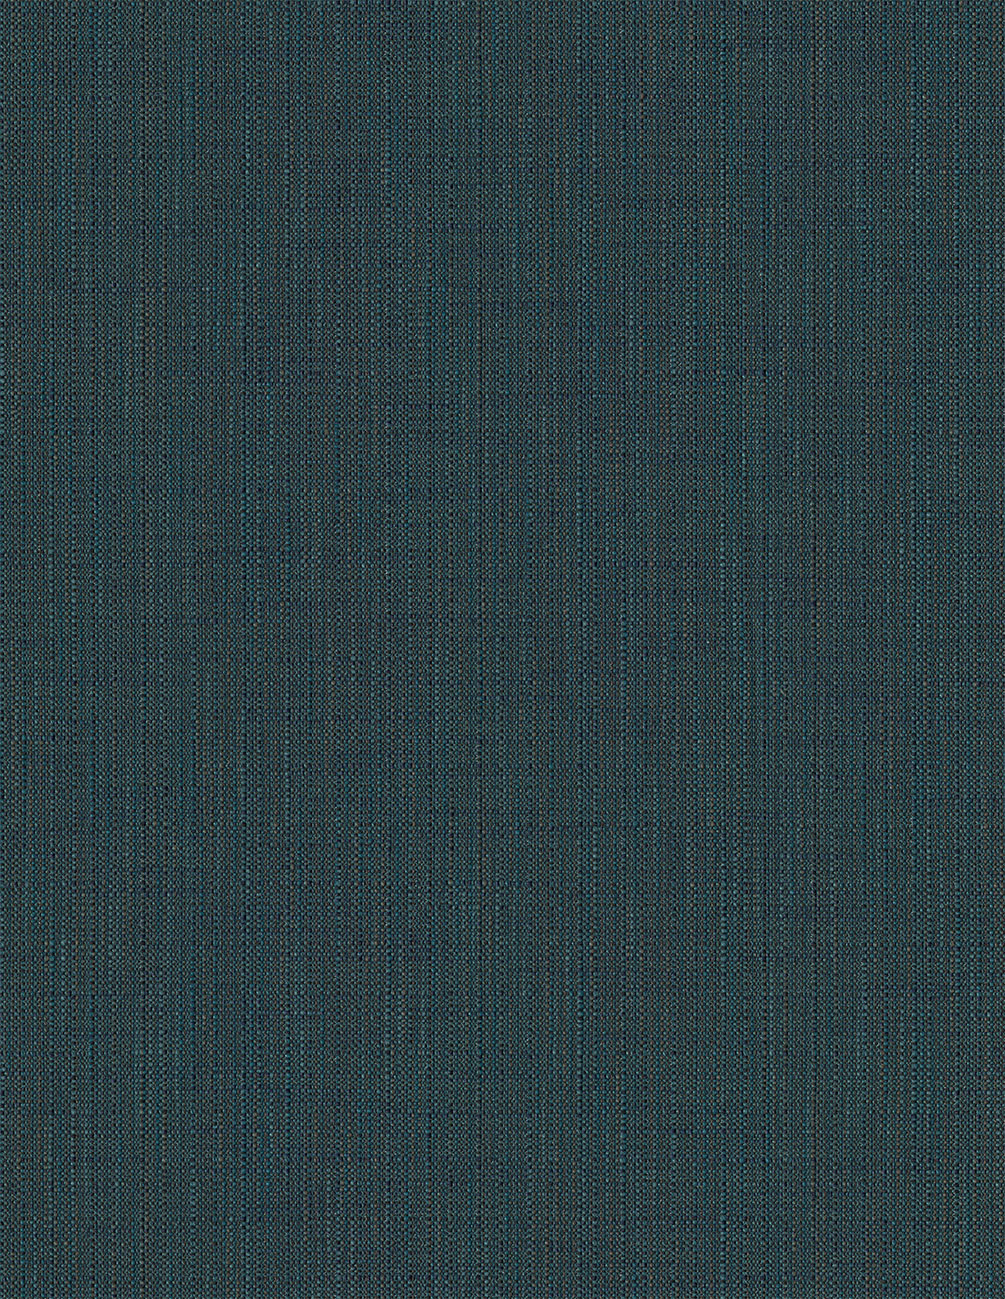 Particulate - Oxidation - 4109 - 09 - Half Yard Tileable Swatches